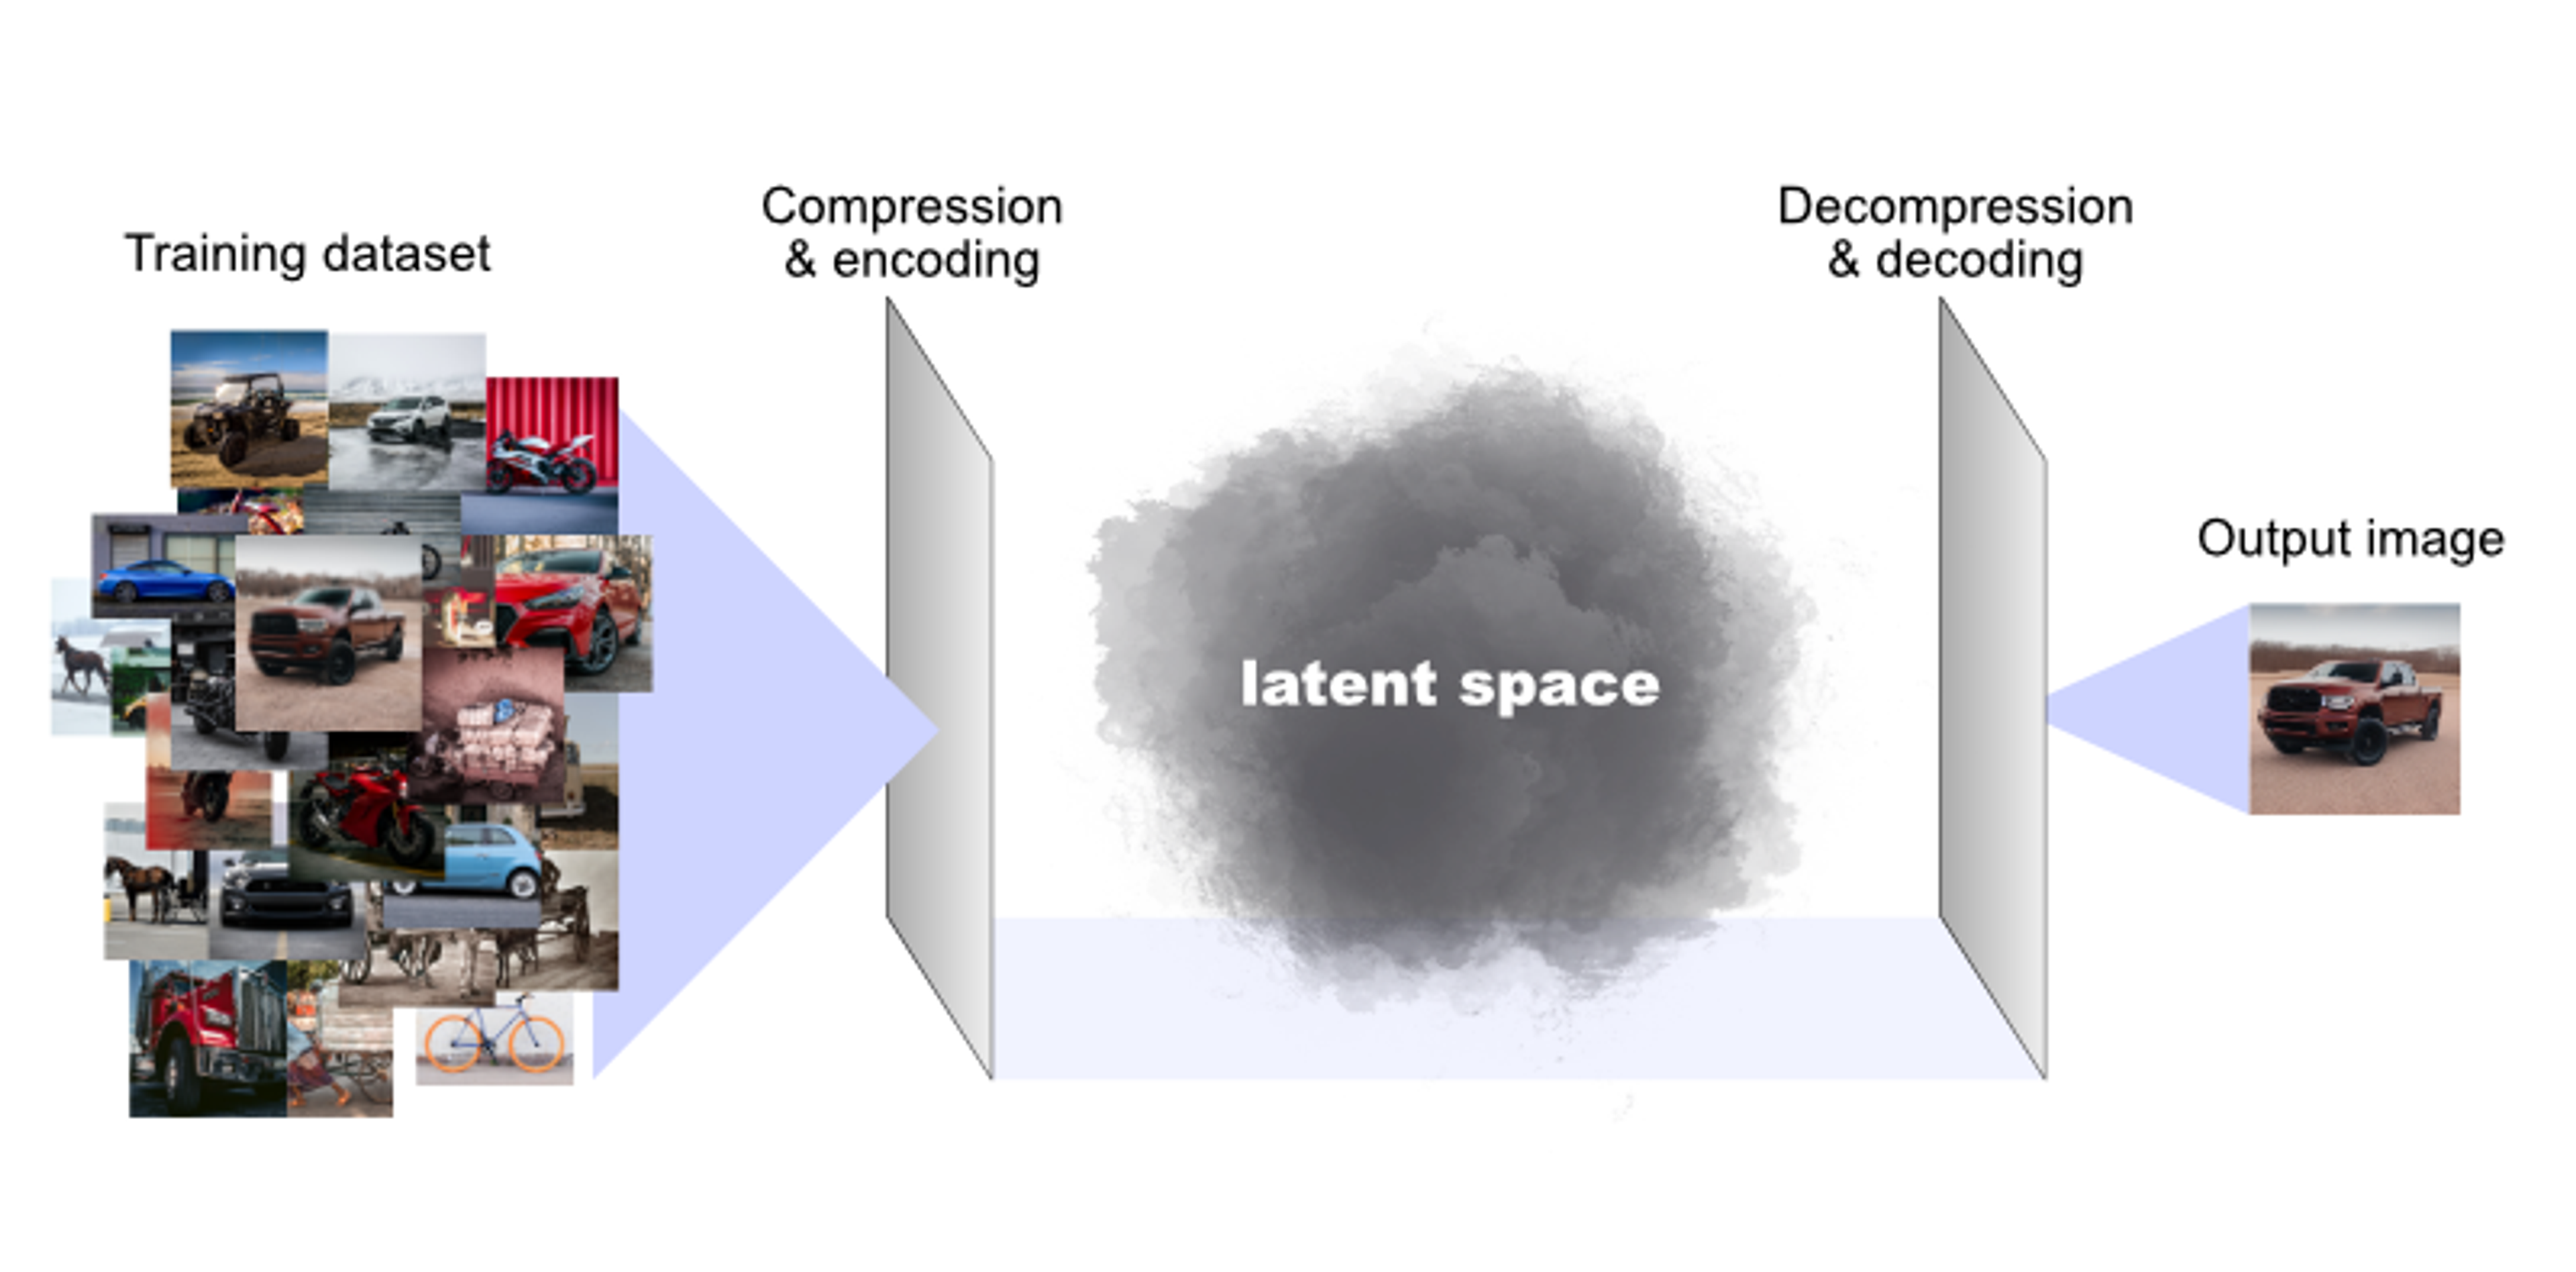 Latent space